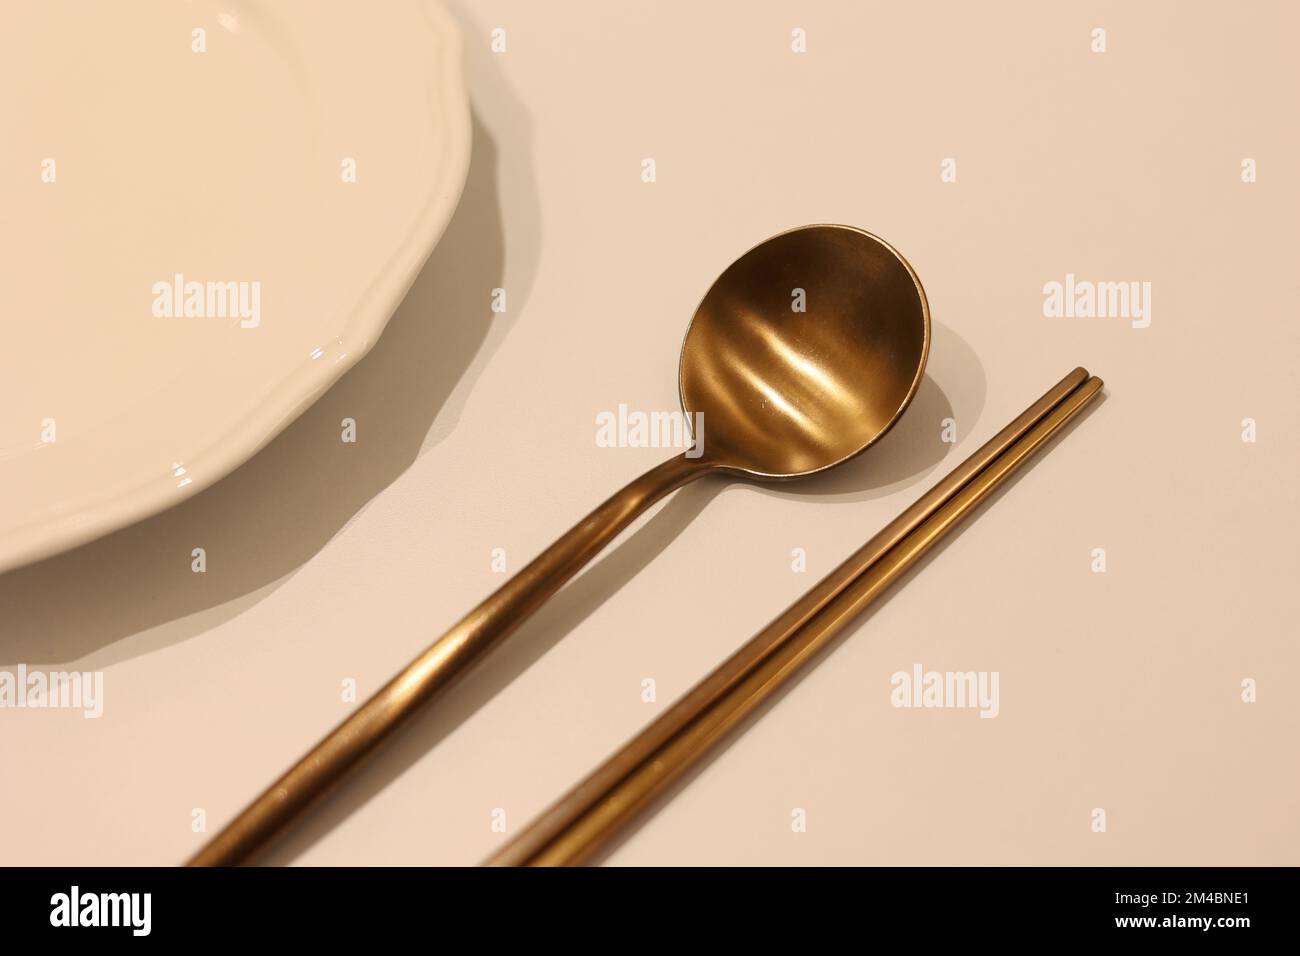 A set of Korean brass spoon and chopstick with empty white dish on the table Stock Photo